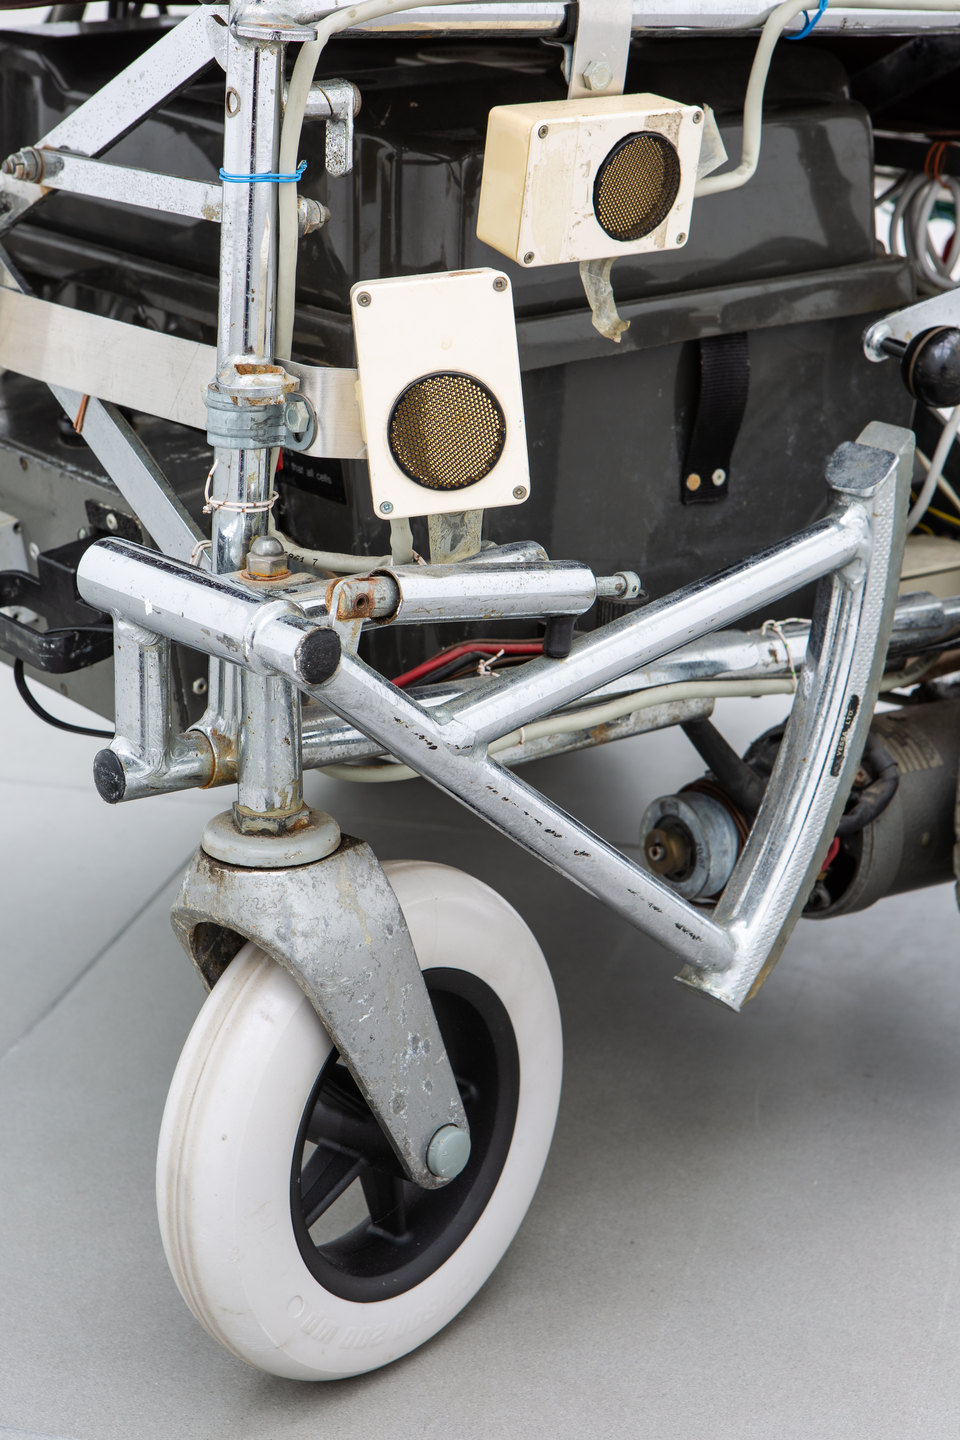 Donald Rodney, 'Psalms' [detail], 1997, Wheelchair, computer, proximity sensors, 95 x 65 x 70cm, Civic Duty, 2019, Cell Project Space